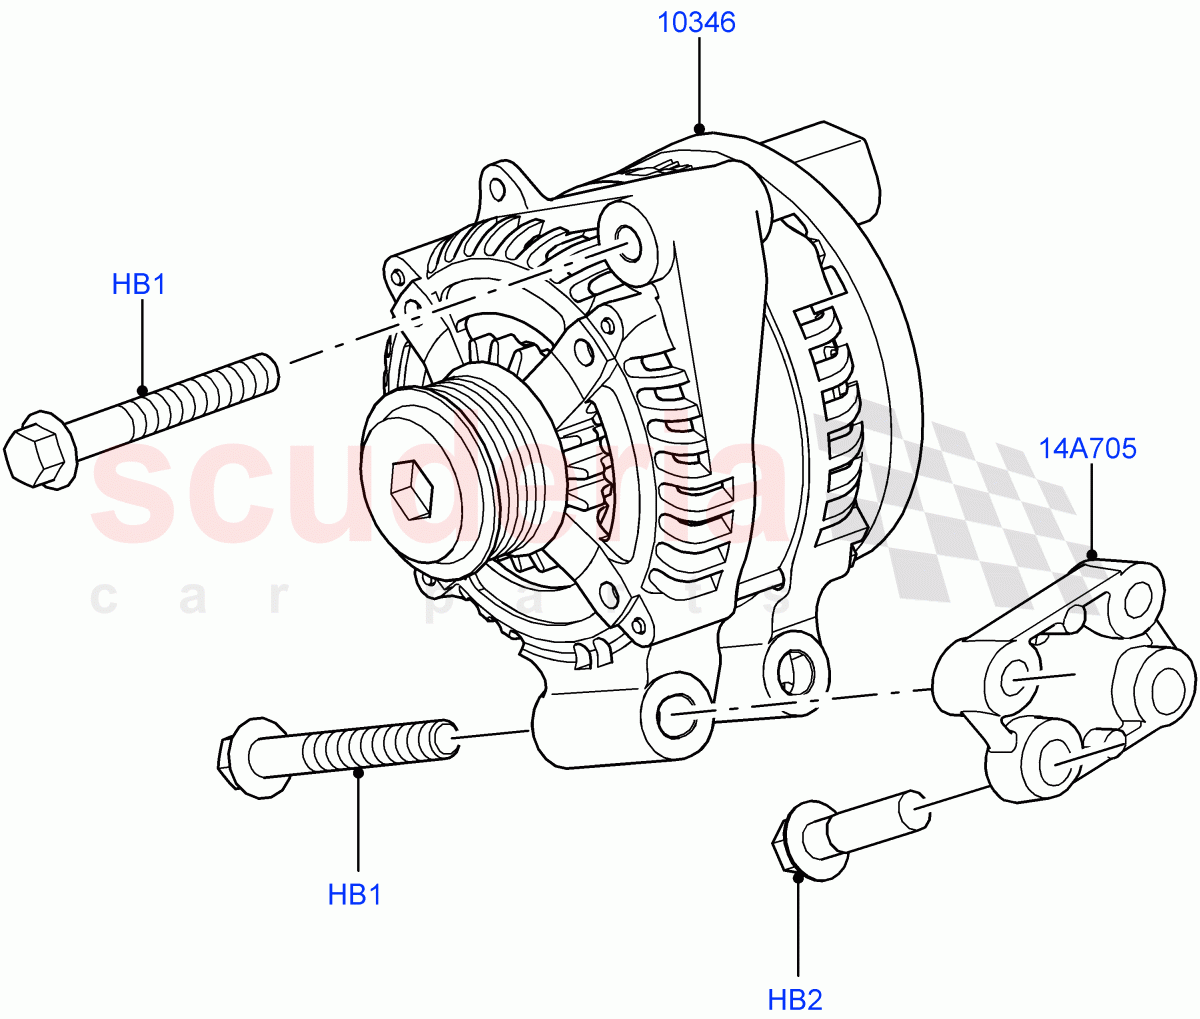 Alternator And Mountings(Solihull Plant Build)(3.0L DOHC GDI SC V6 PETROL)((V)FROMHA000001) of Land Rover Land Rover Discovery 5 (2017+) [3.0 DOHC GDI SC V6 Petrol]